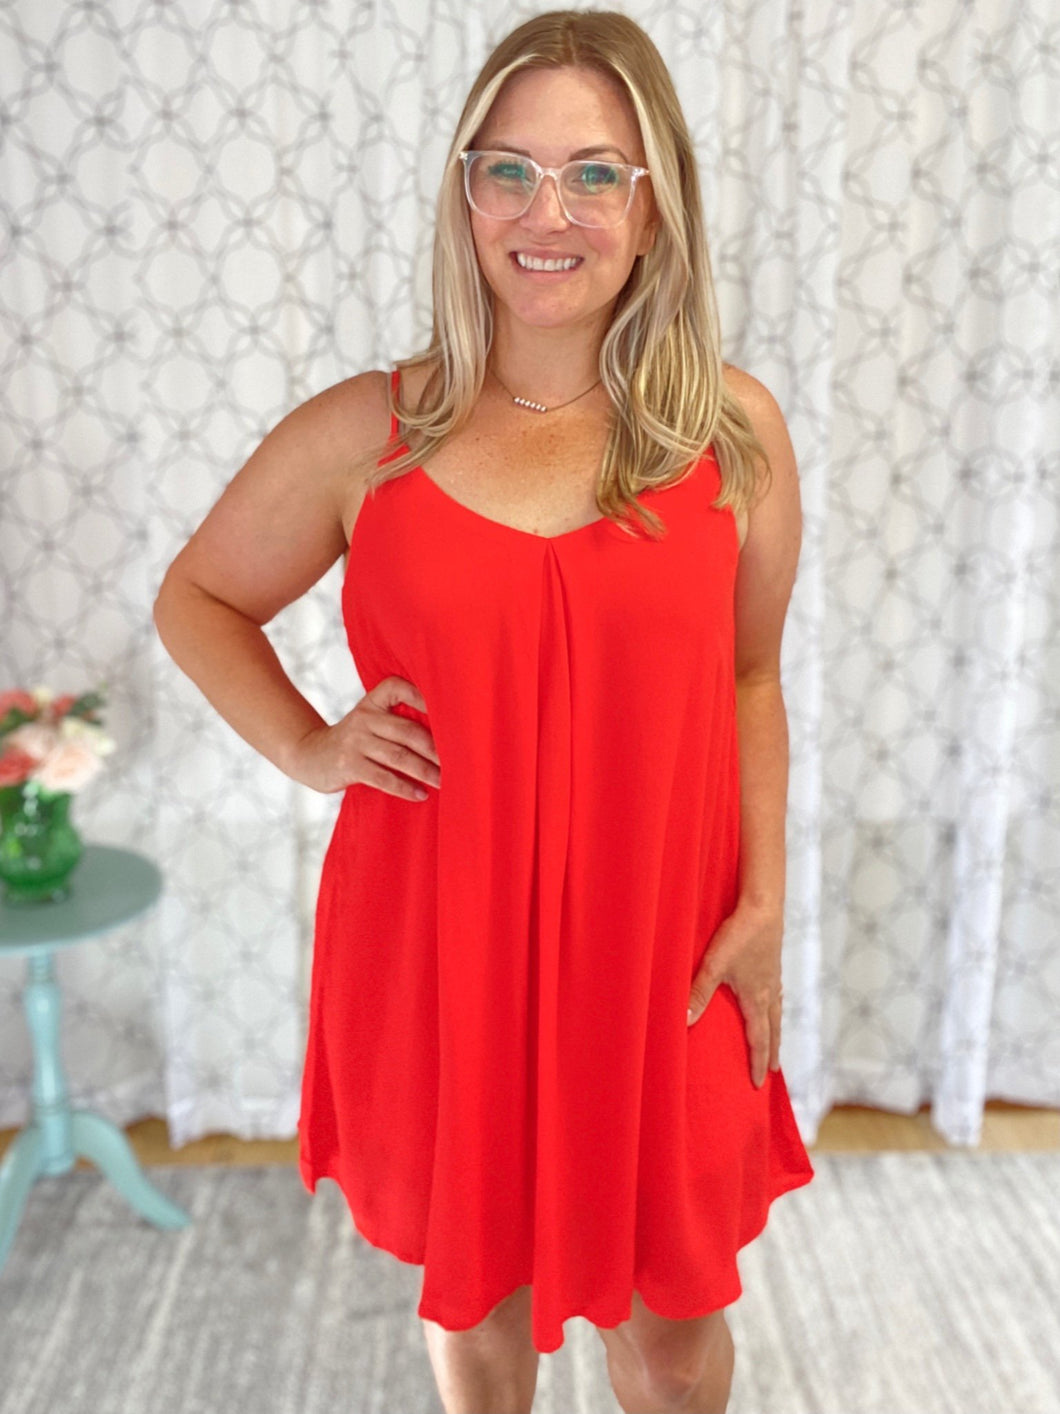 Strapped In for Summer Dress in Red